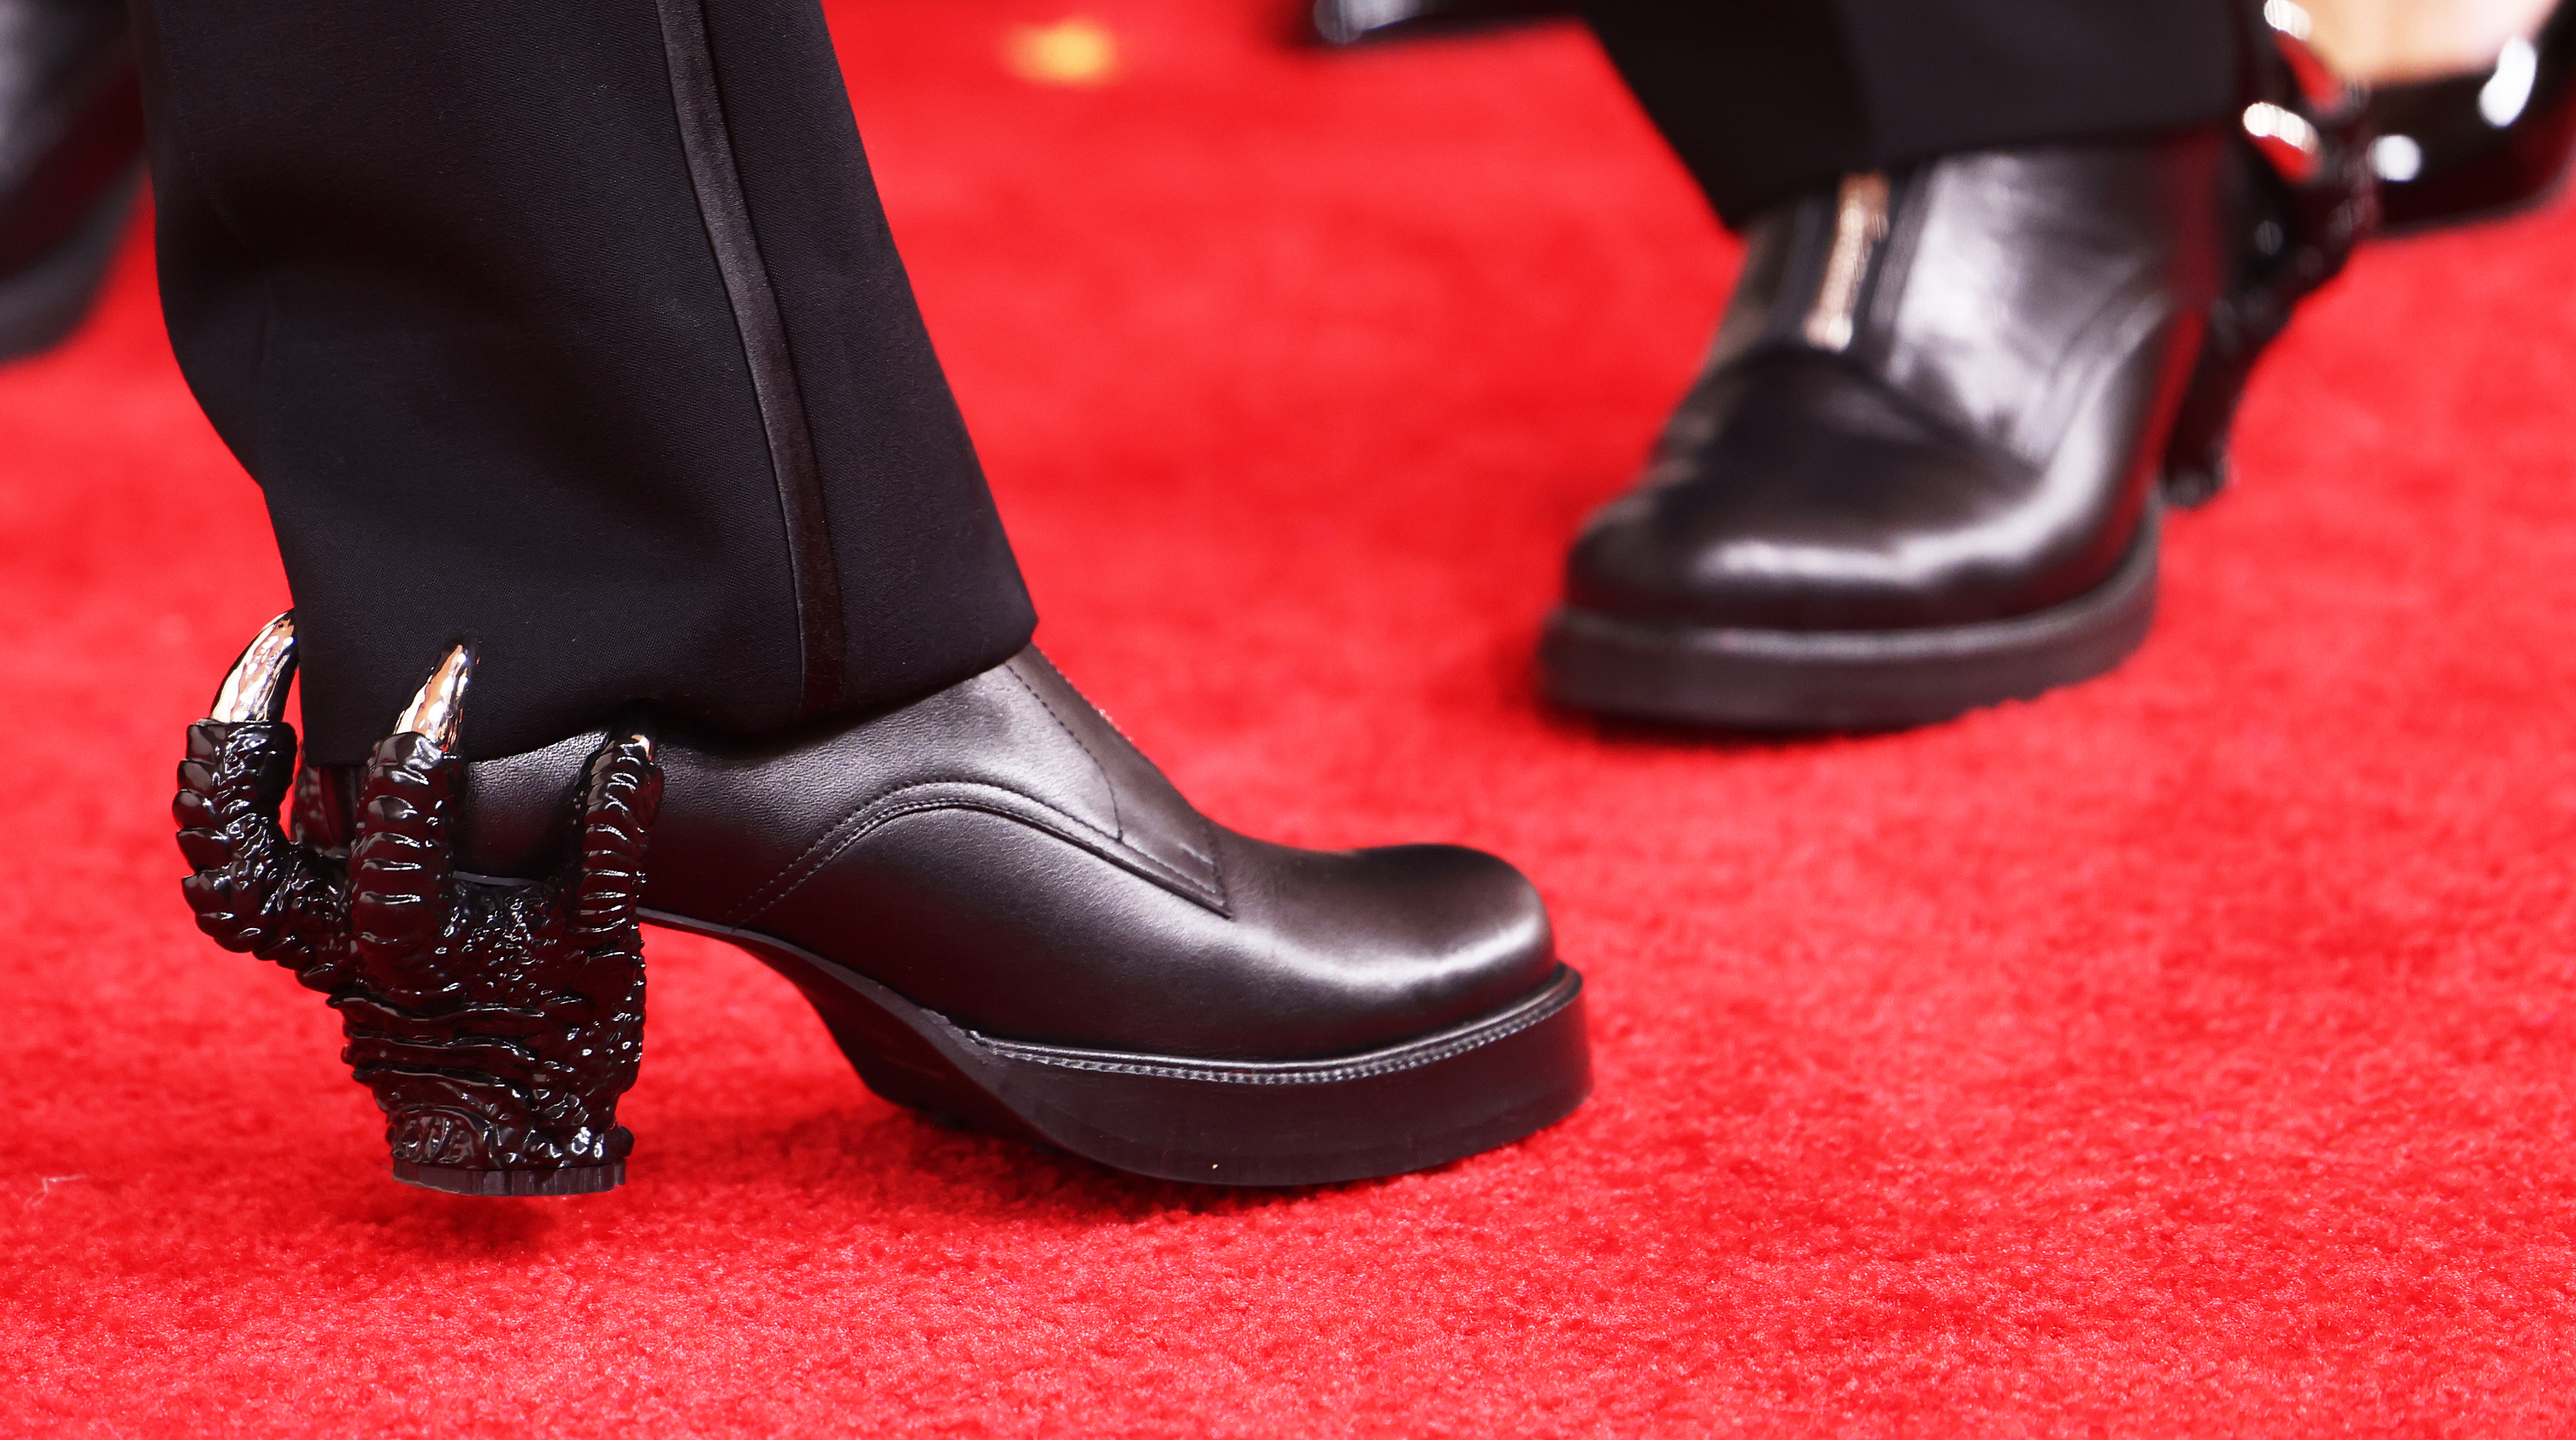 Close-up of a celebrity&#x27;s black shoe with unique claw heel design on the red carpet